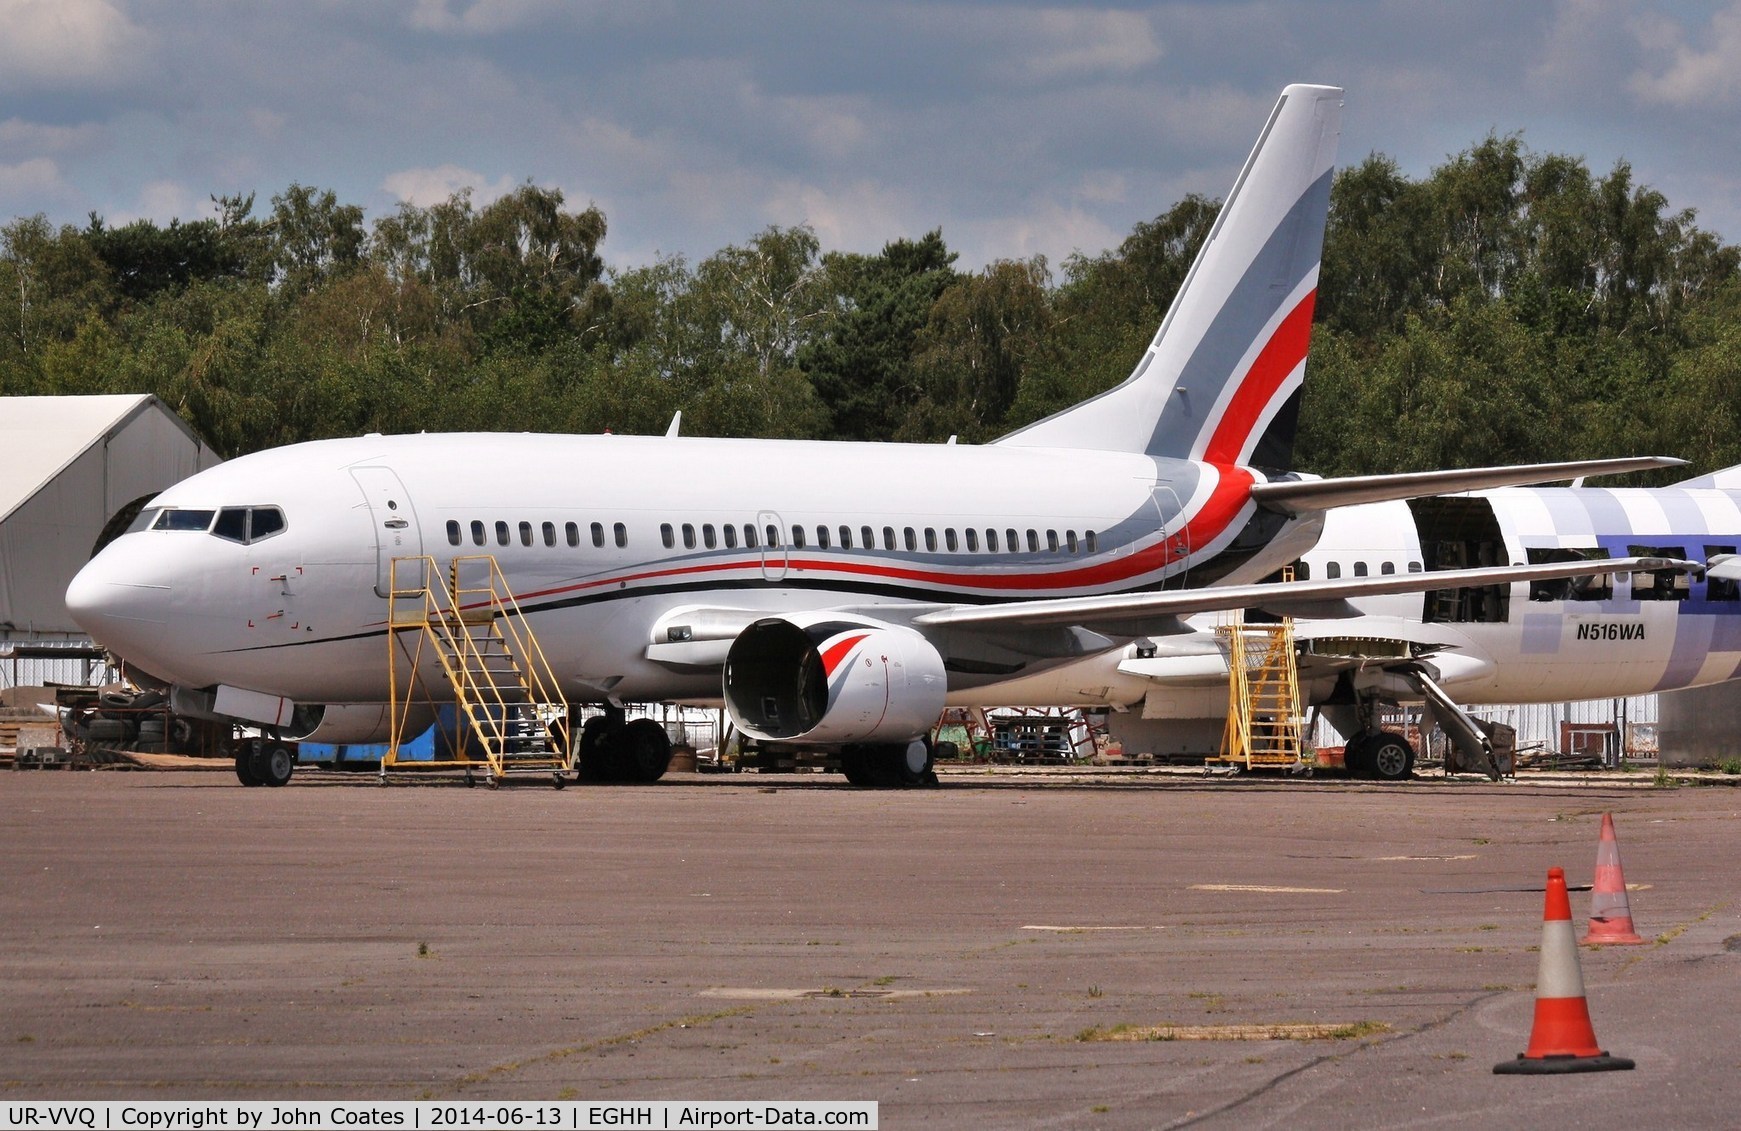 UR-VVQ, 1998 Boeing 737-5L9 C/N 29235, Just repainted - and actually currently un-registered